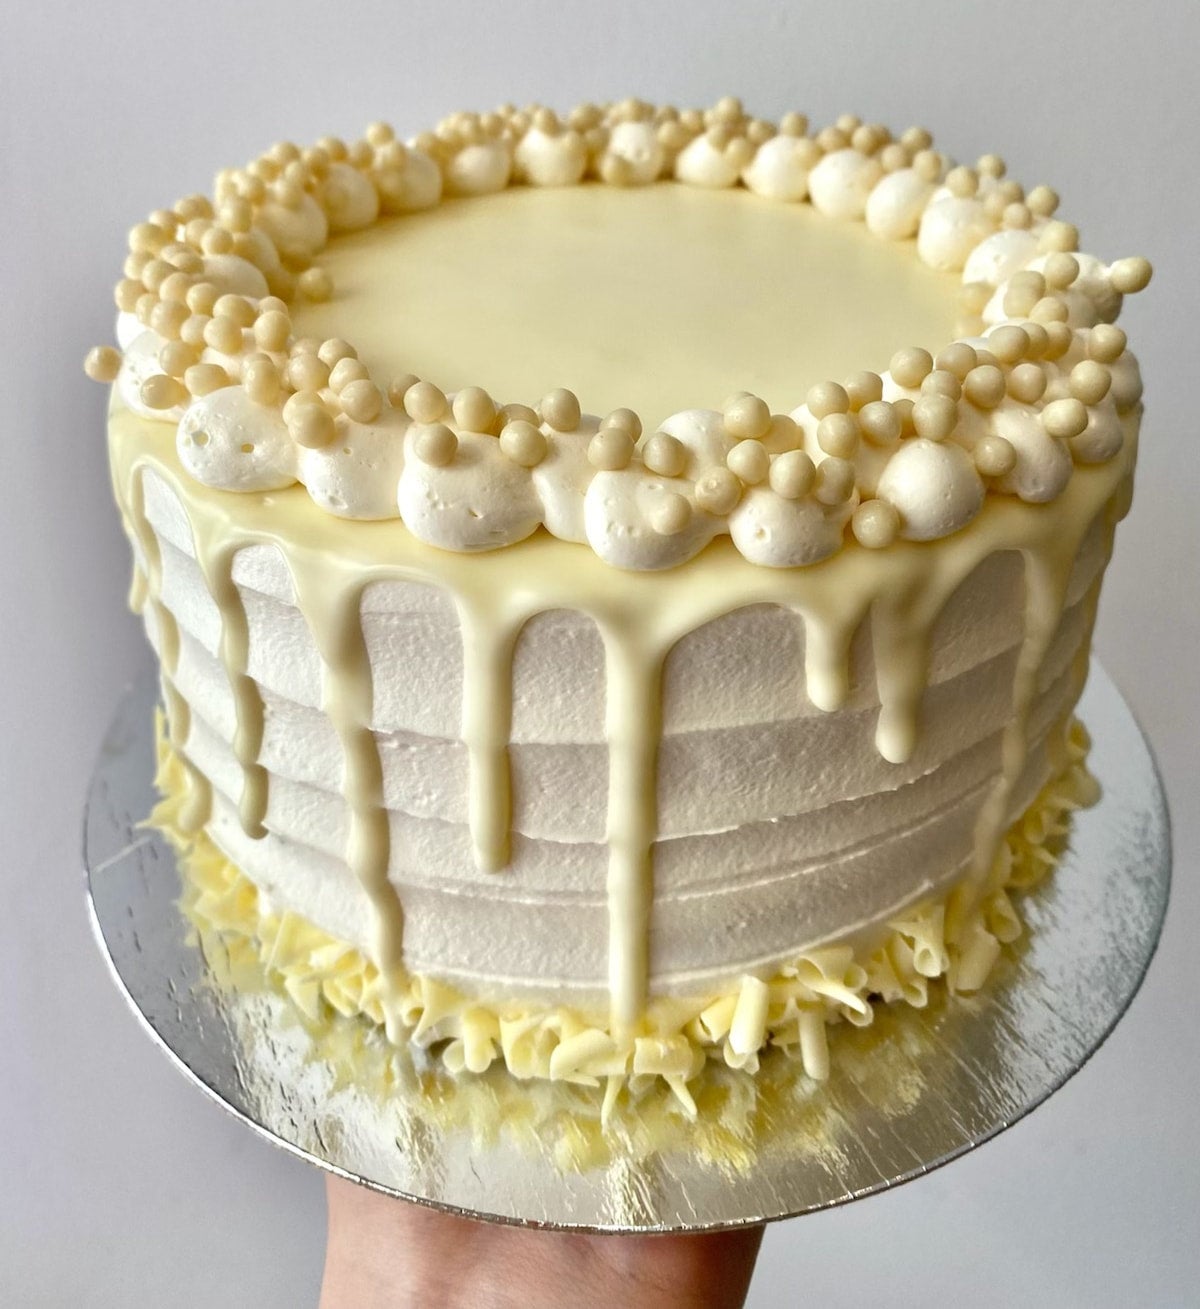 Anna's Cakes - a nod to the delicious - Oakville News